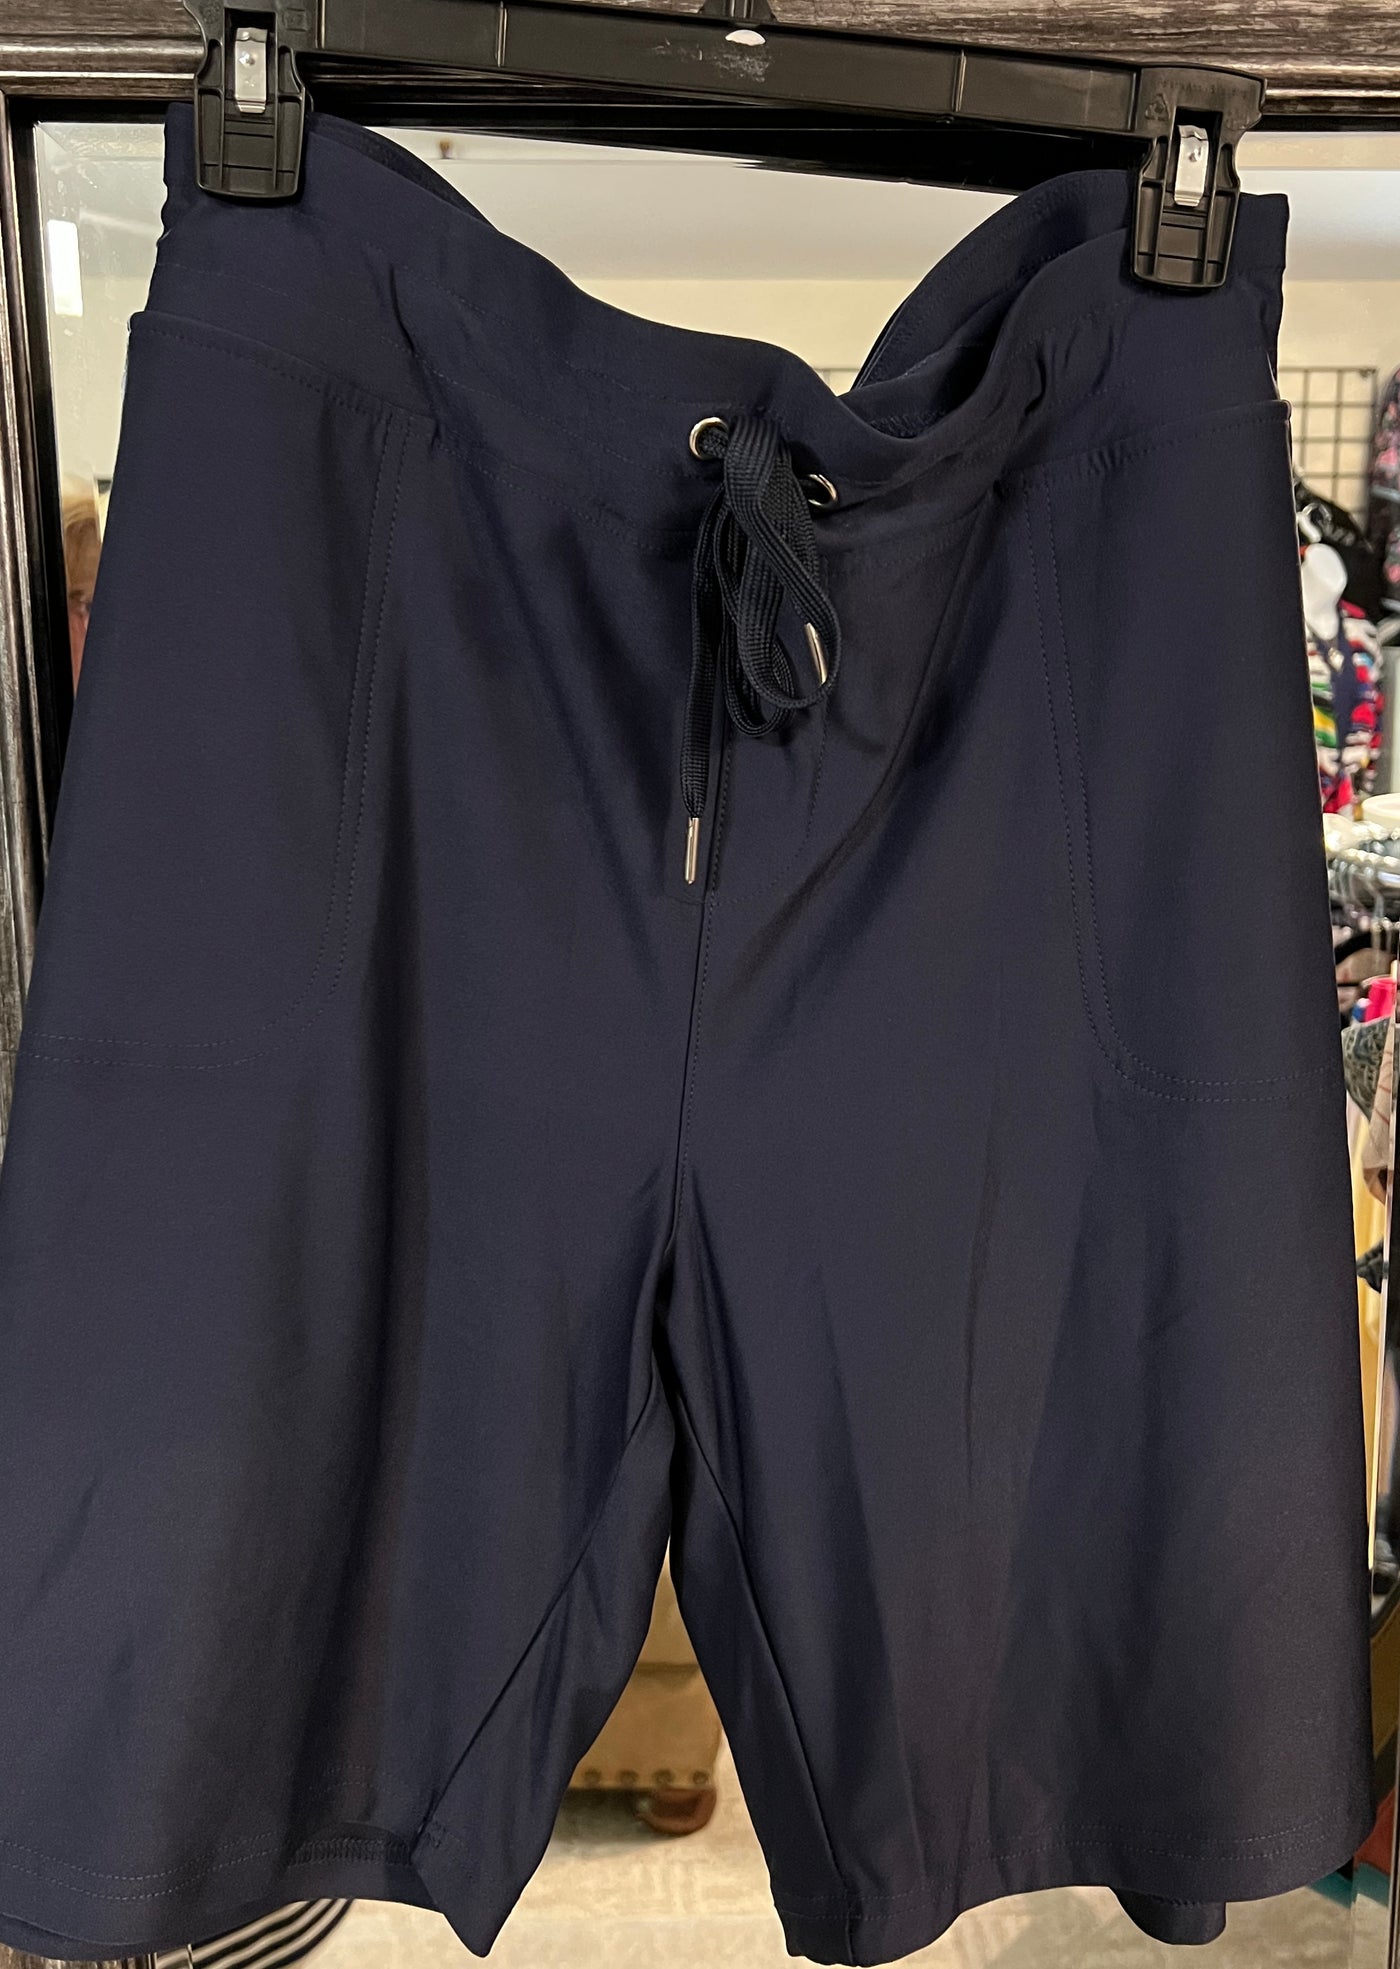 Shorts 2 way stretch Black and Navy